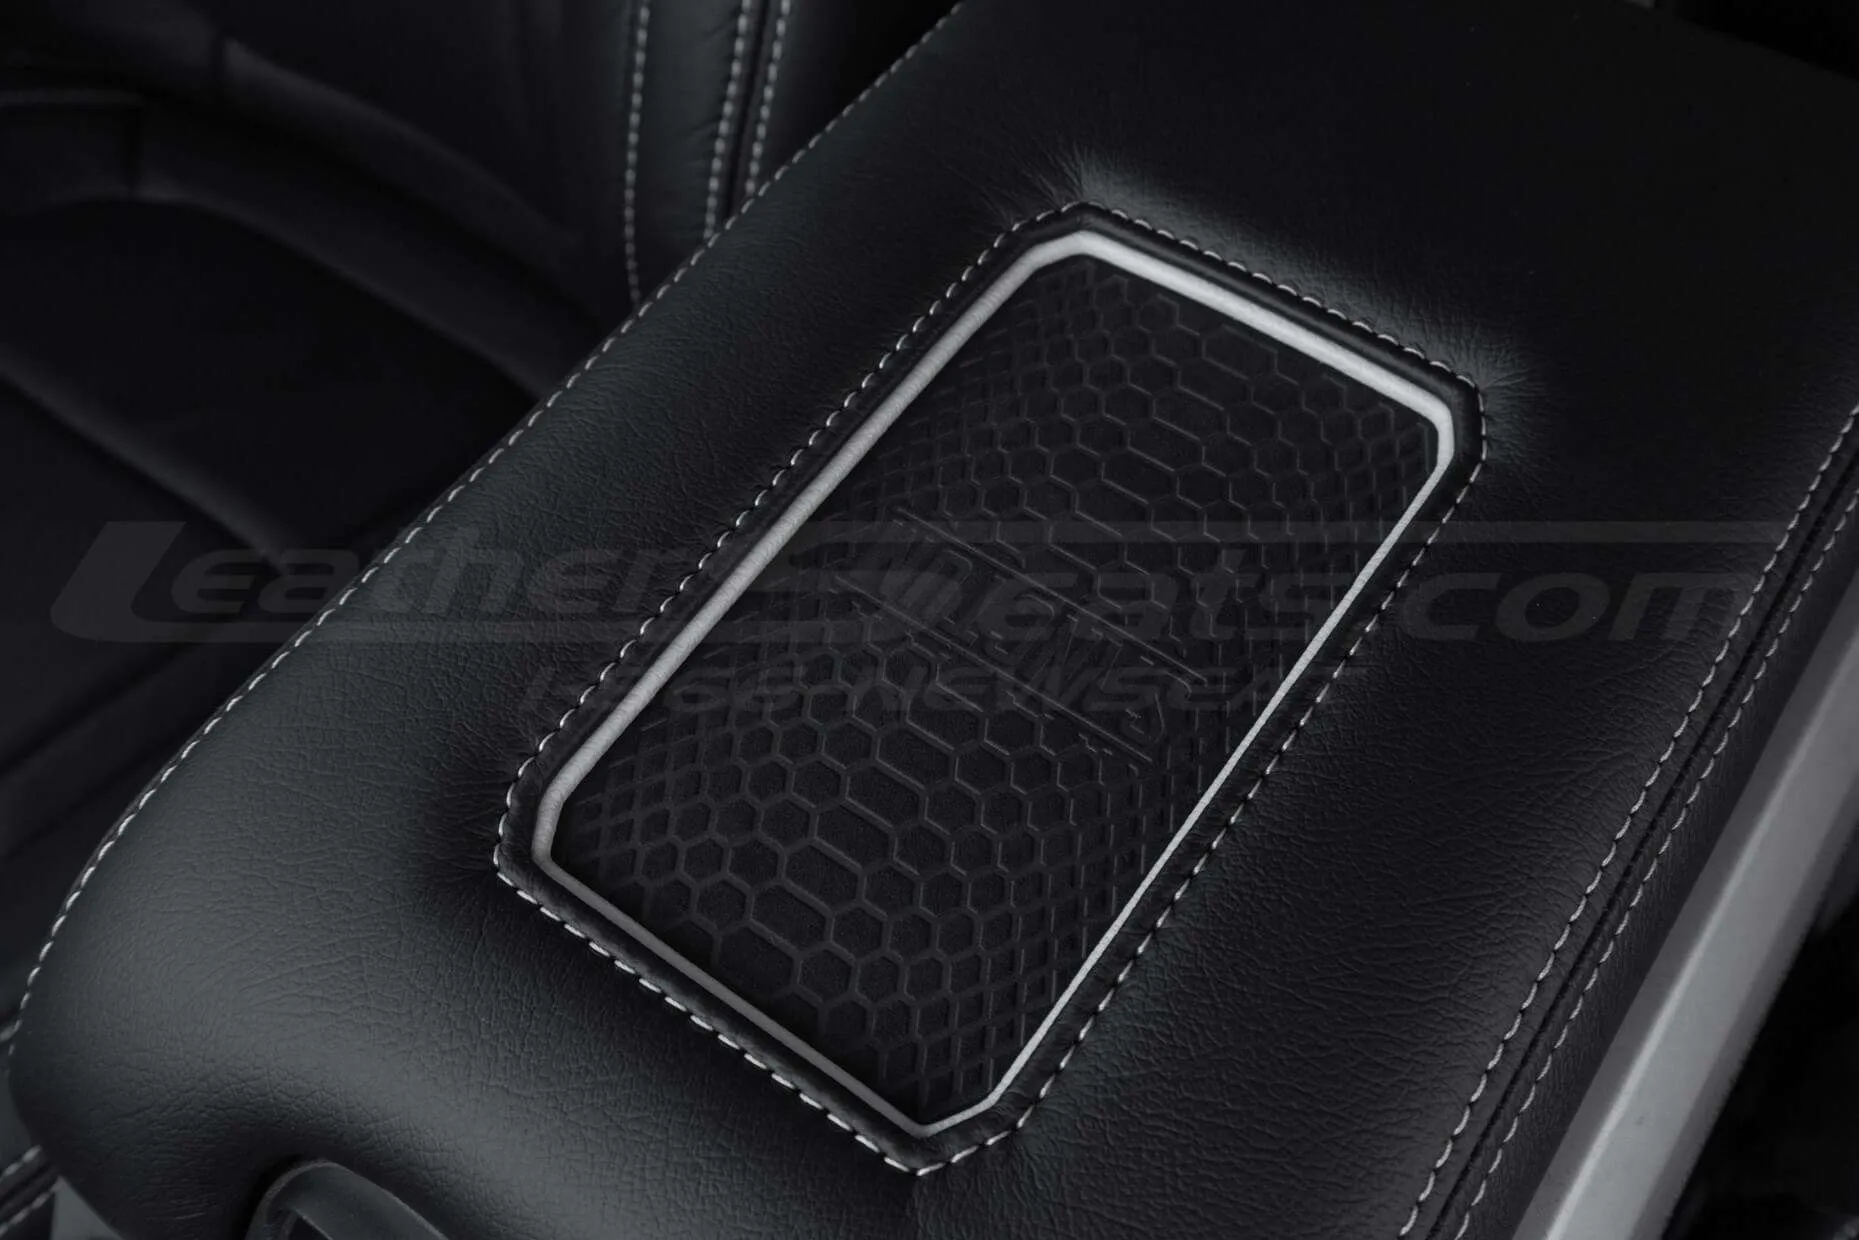 Phone charging pad close-up on leather center console lid